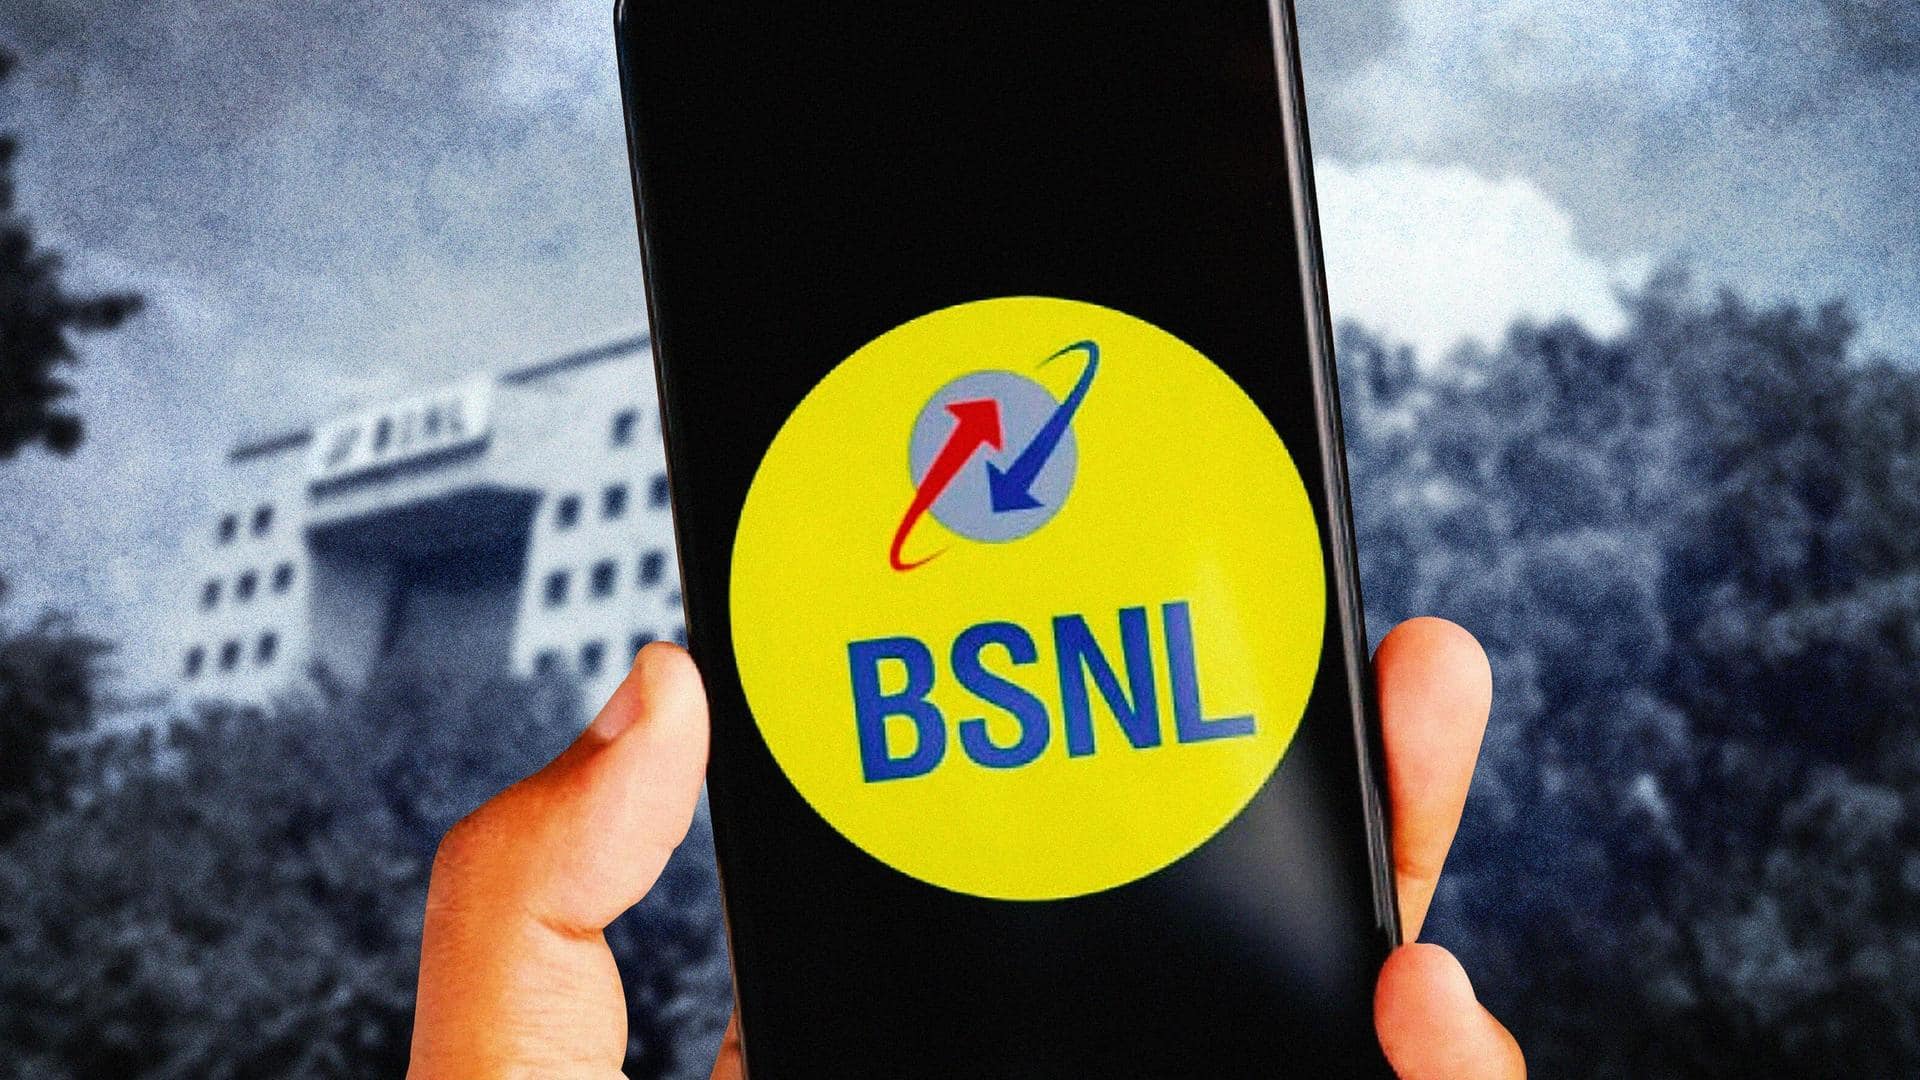 BSNL is hiring for 55 new jobs, stipend upto Rs 8K; details here | TJinsite